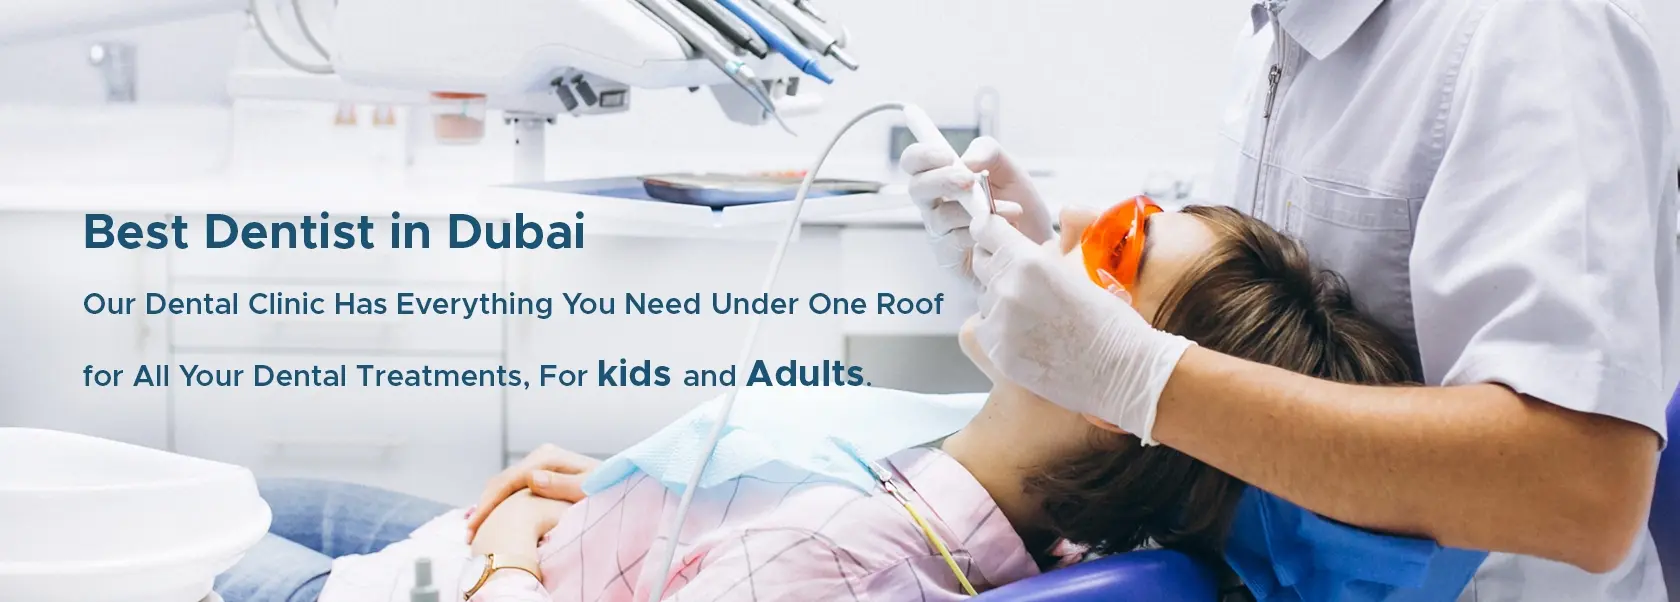 Best Dentist in Dubai Our Dental Clinic Has Everything You Need Under One Roof for All Your Dental Treatments, For kids and Adults.